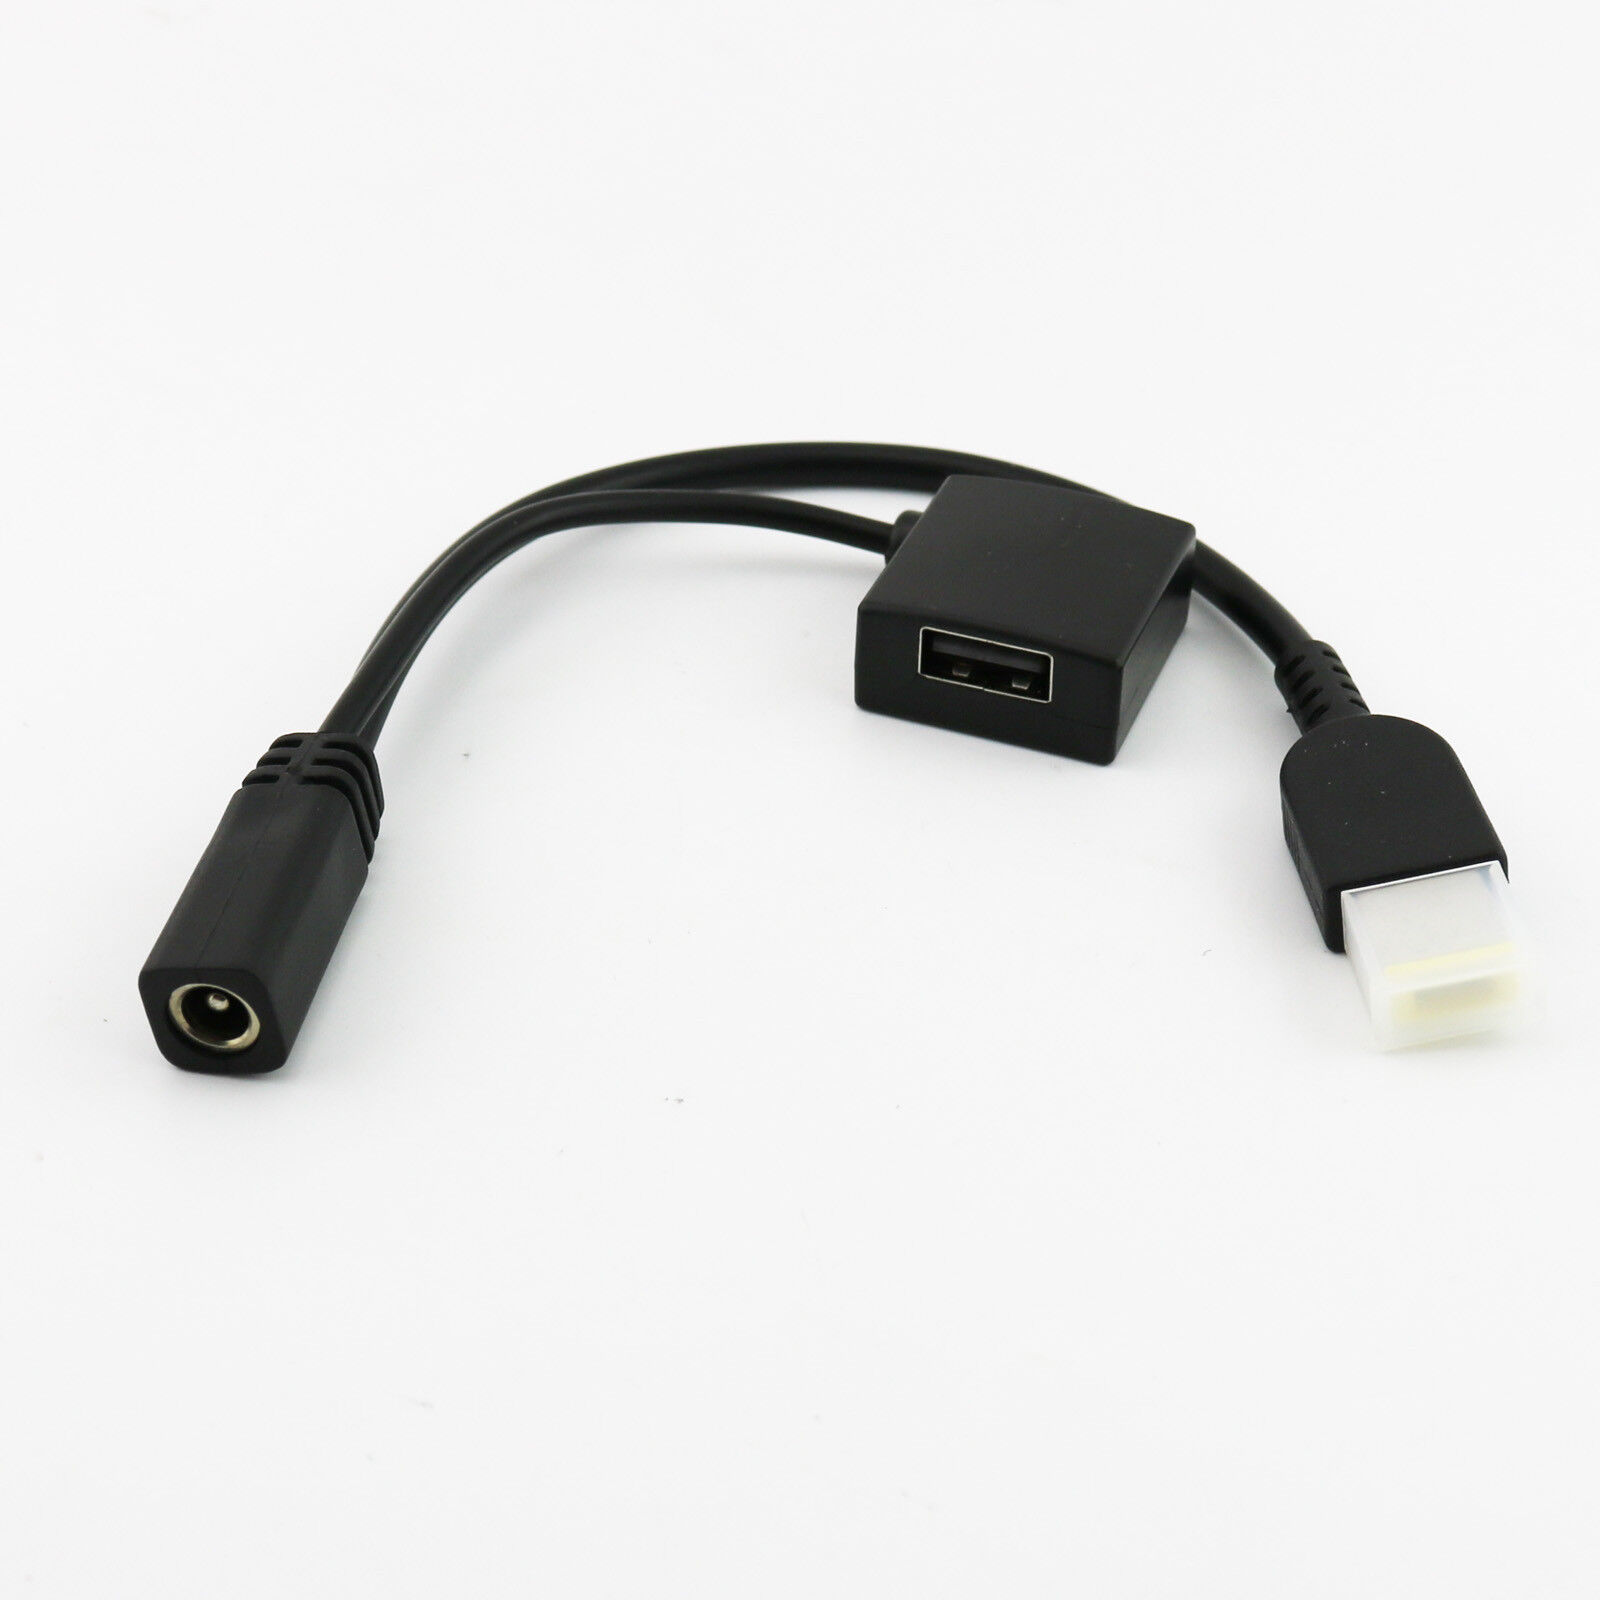 1x 2 in 1 5.5x2.1mm Female to Square Plug End Pigtail and USB Charger Cable